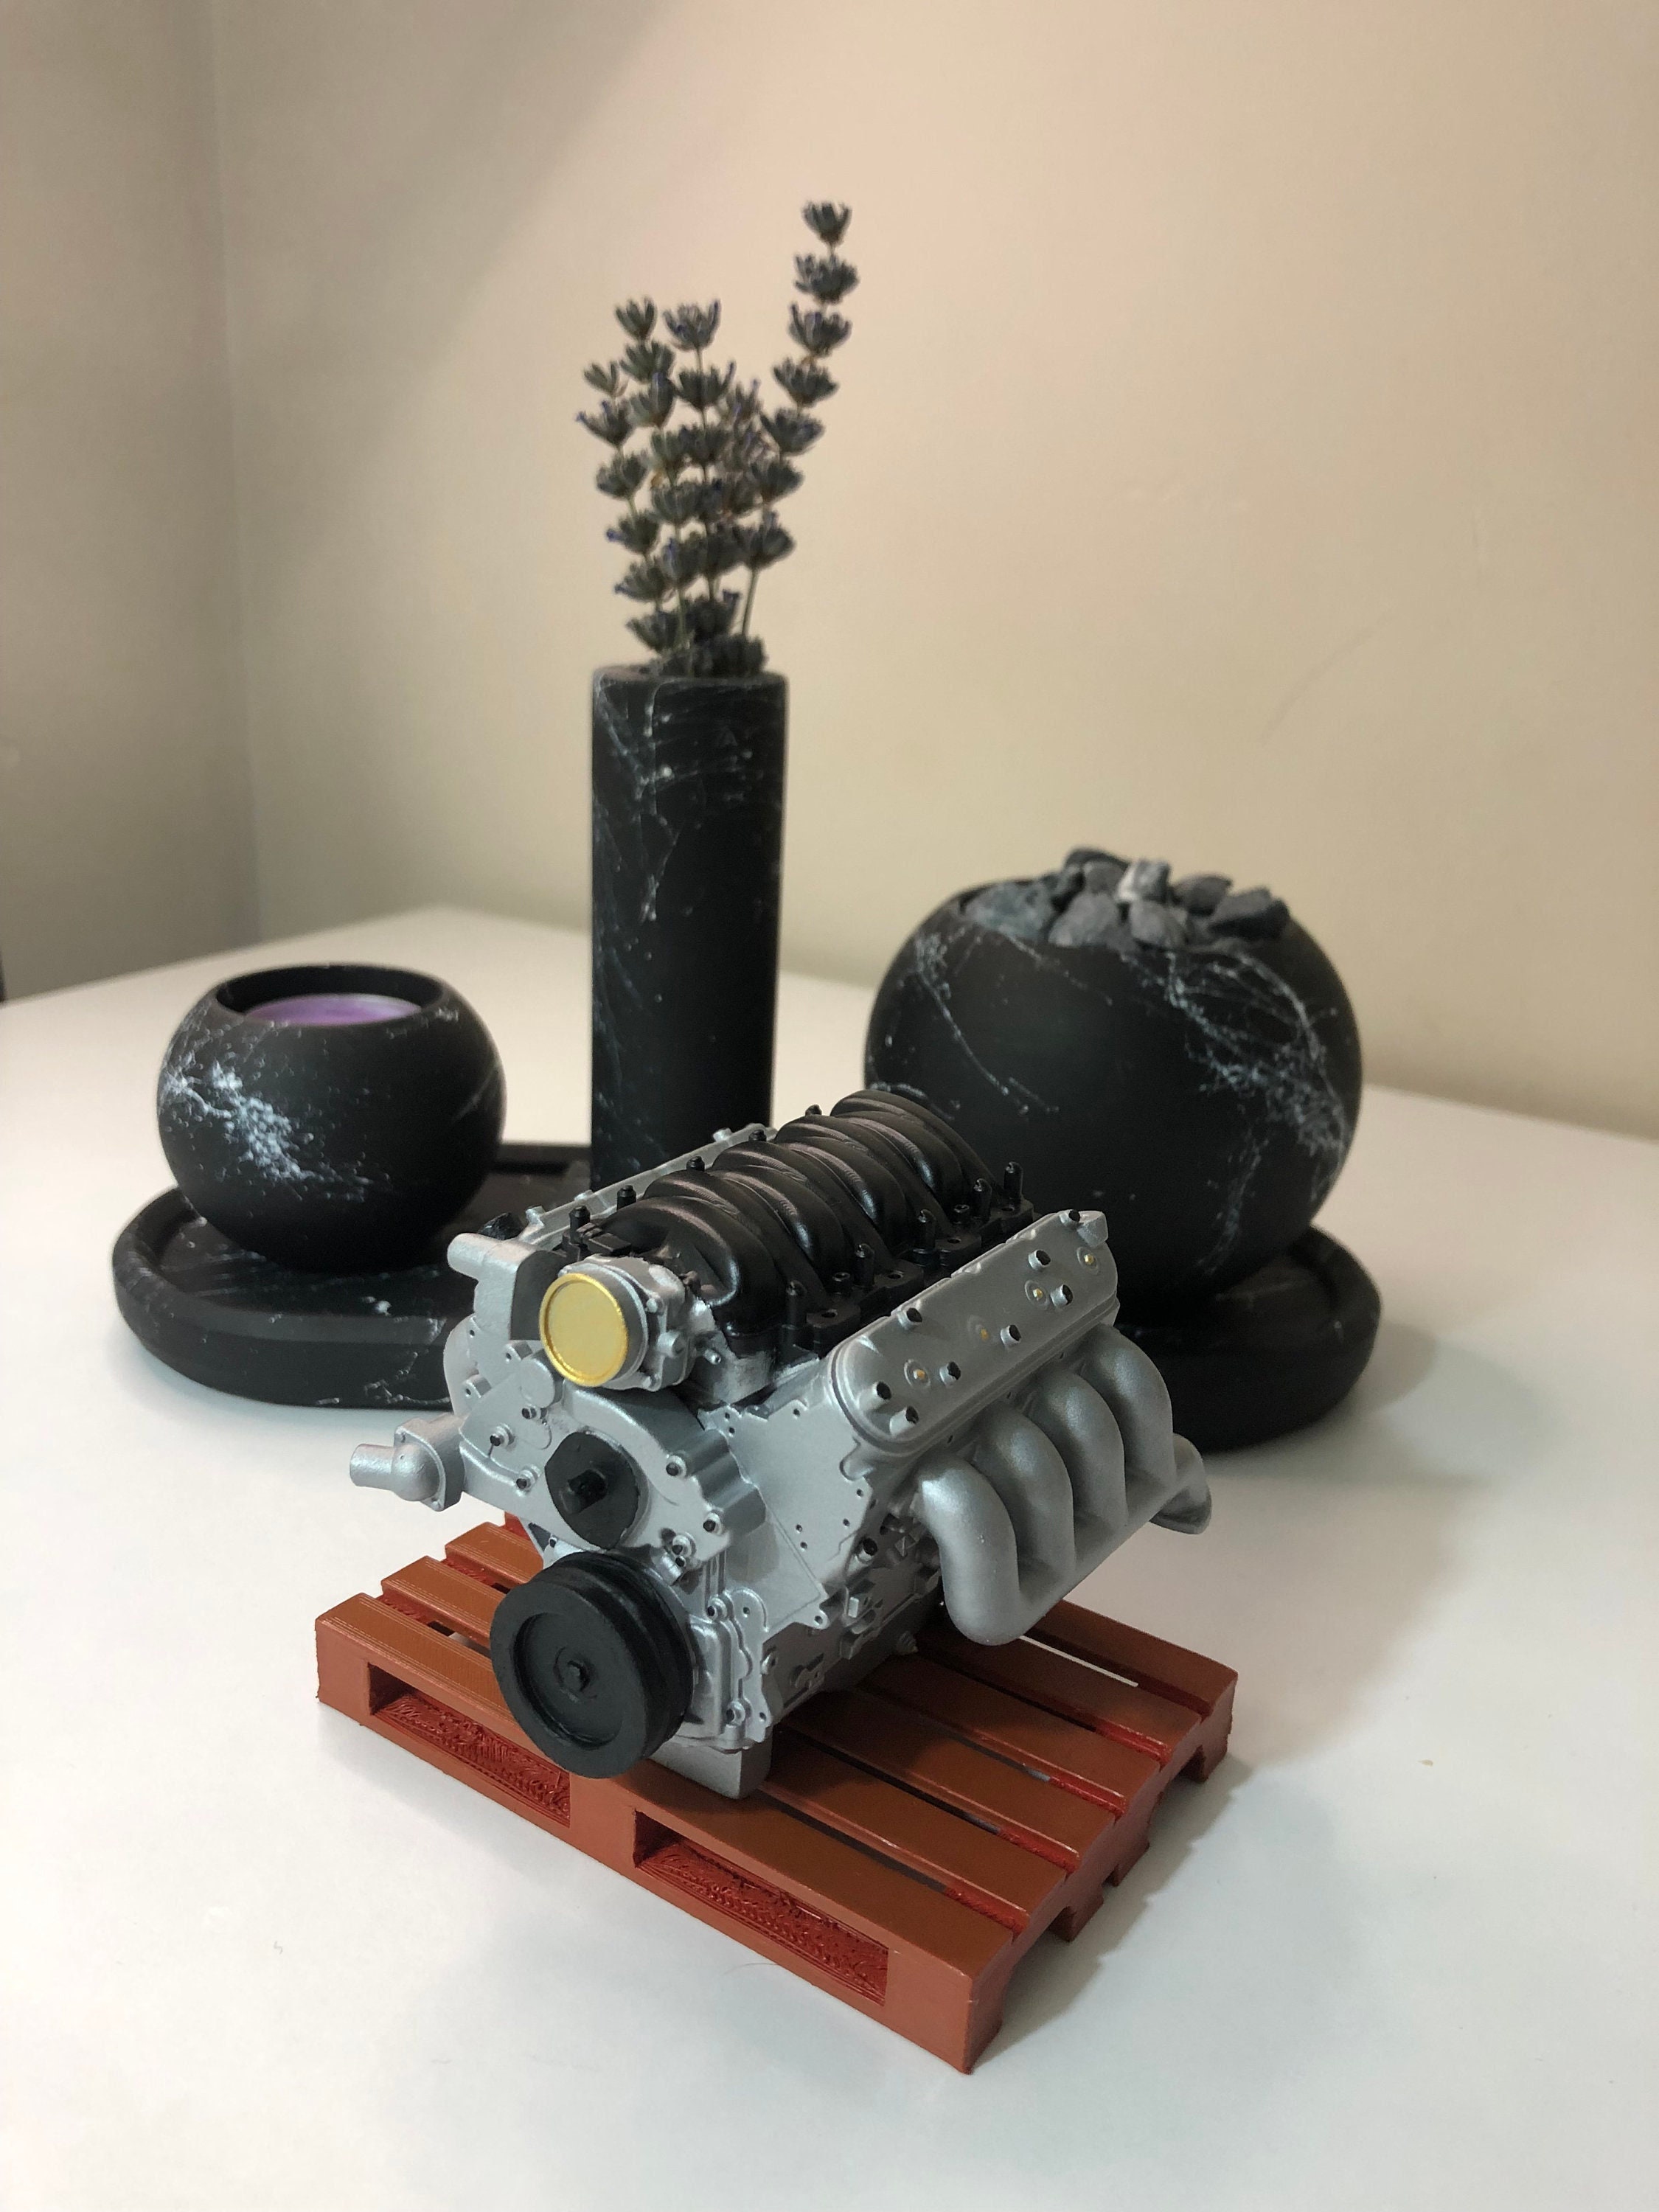 3D Printing V8 Engine Part 1: Creating Pistons and Engine Block